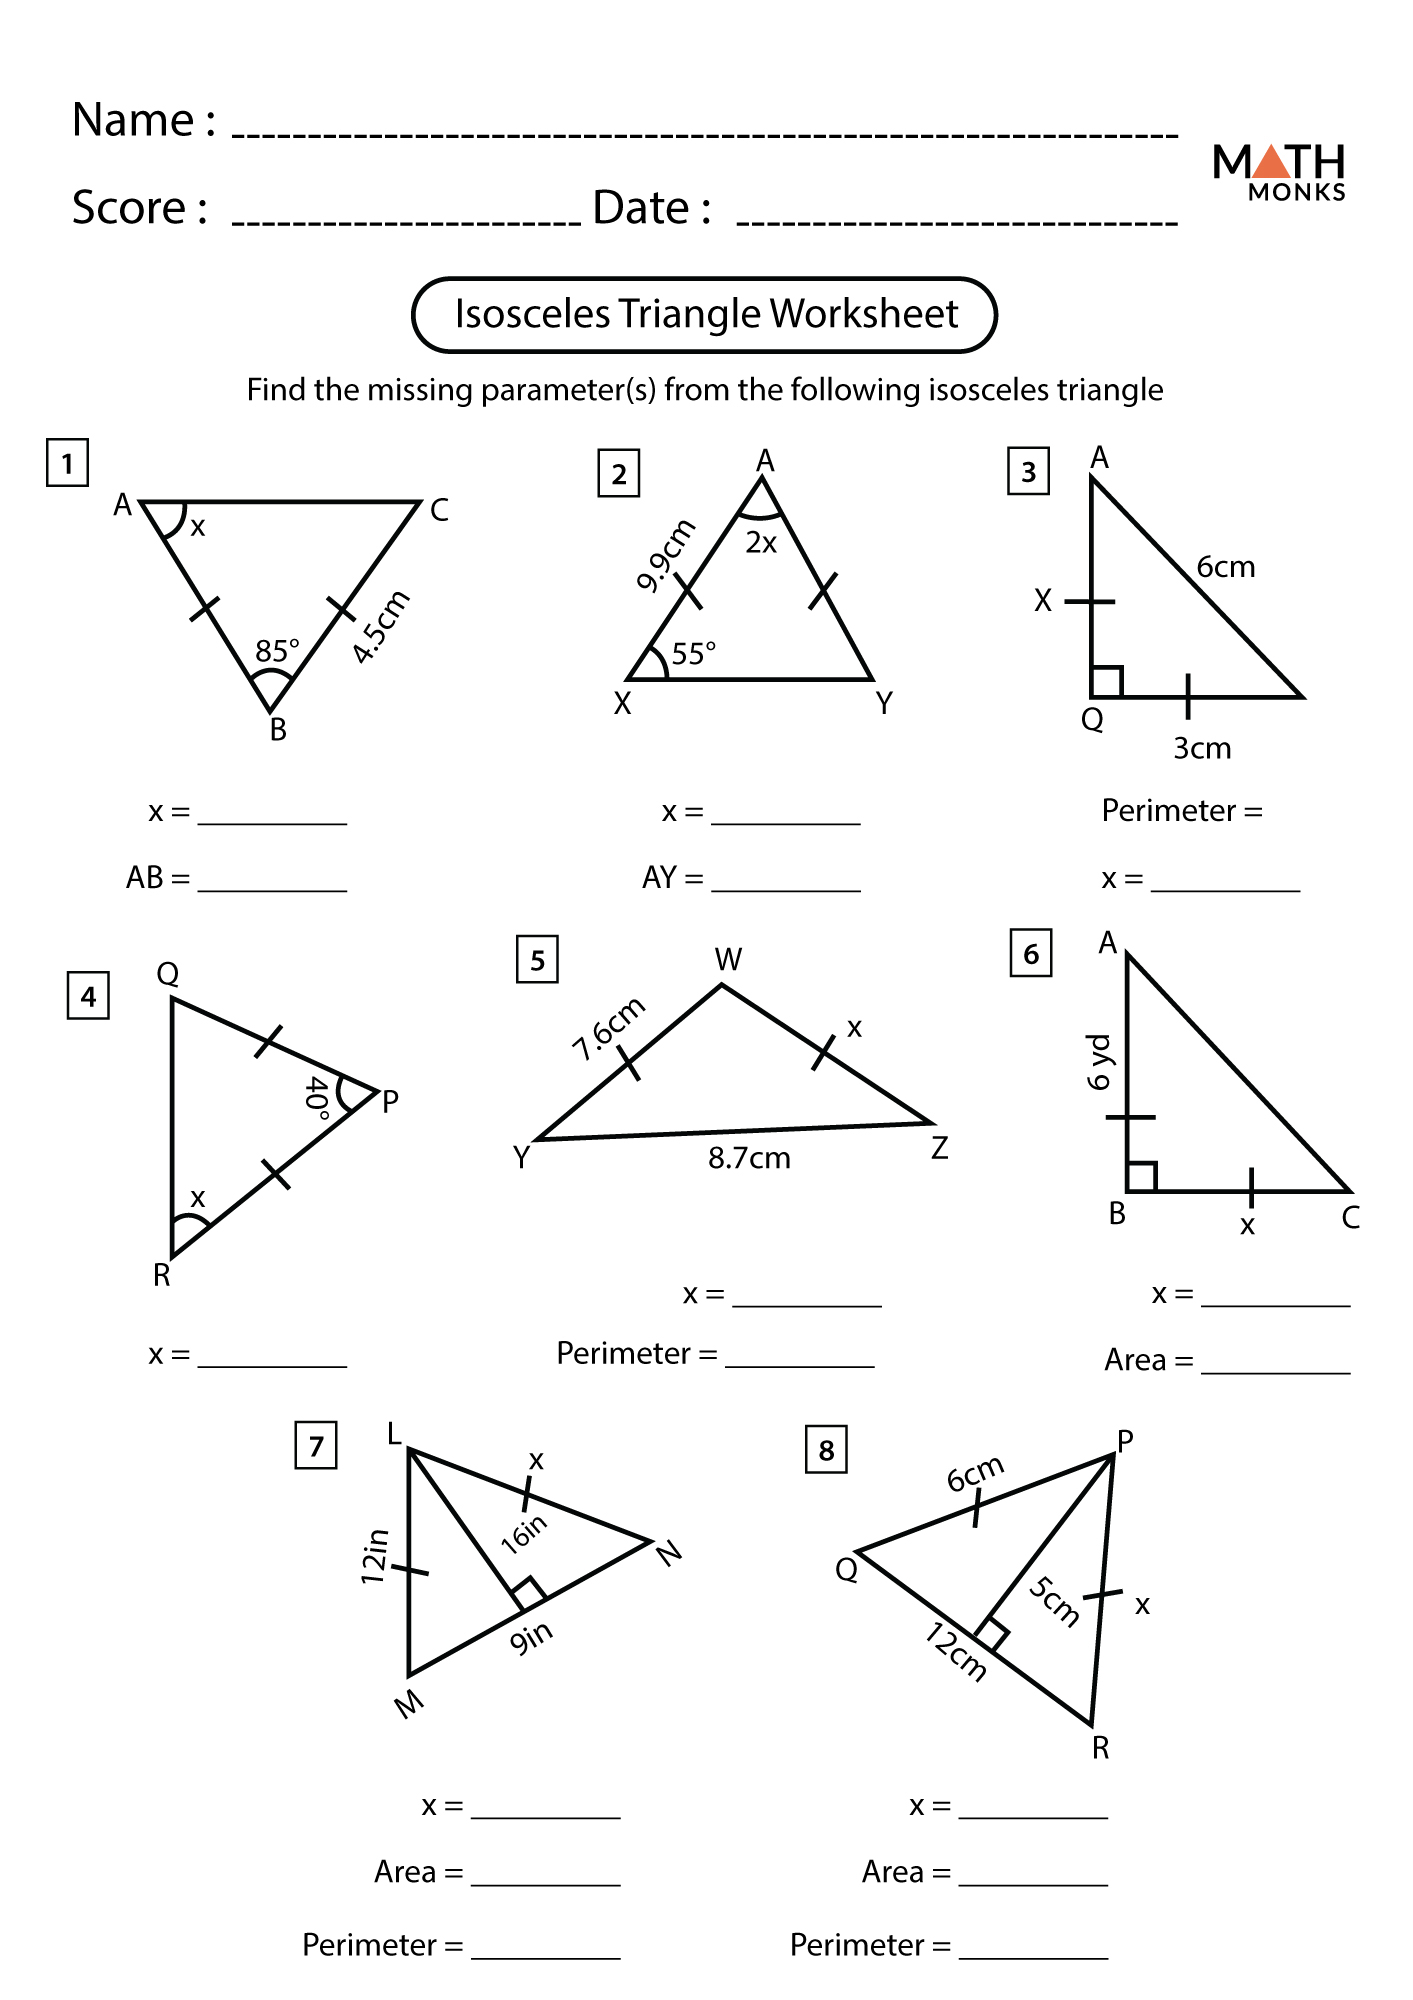 Isosceles Triangle Proofs Worksheet With Answers